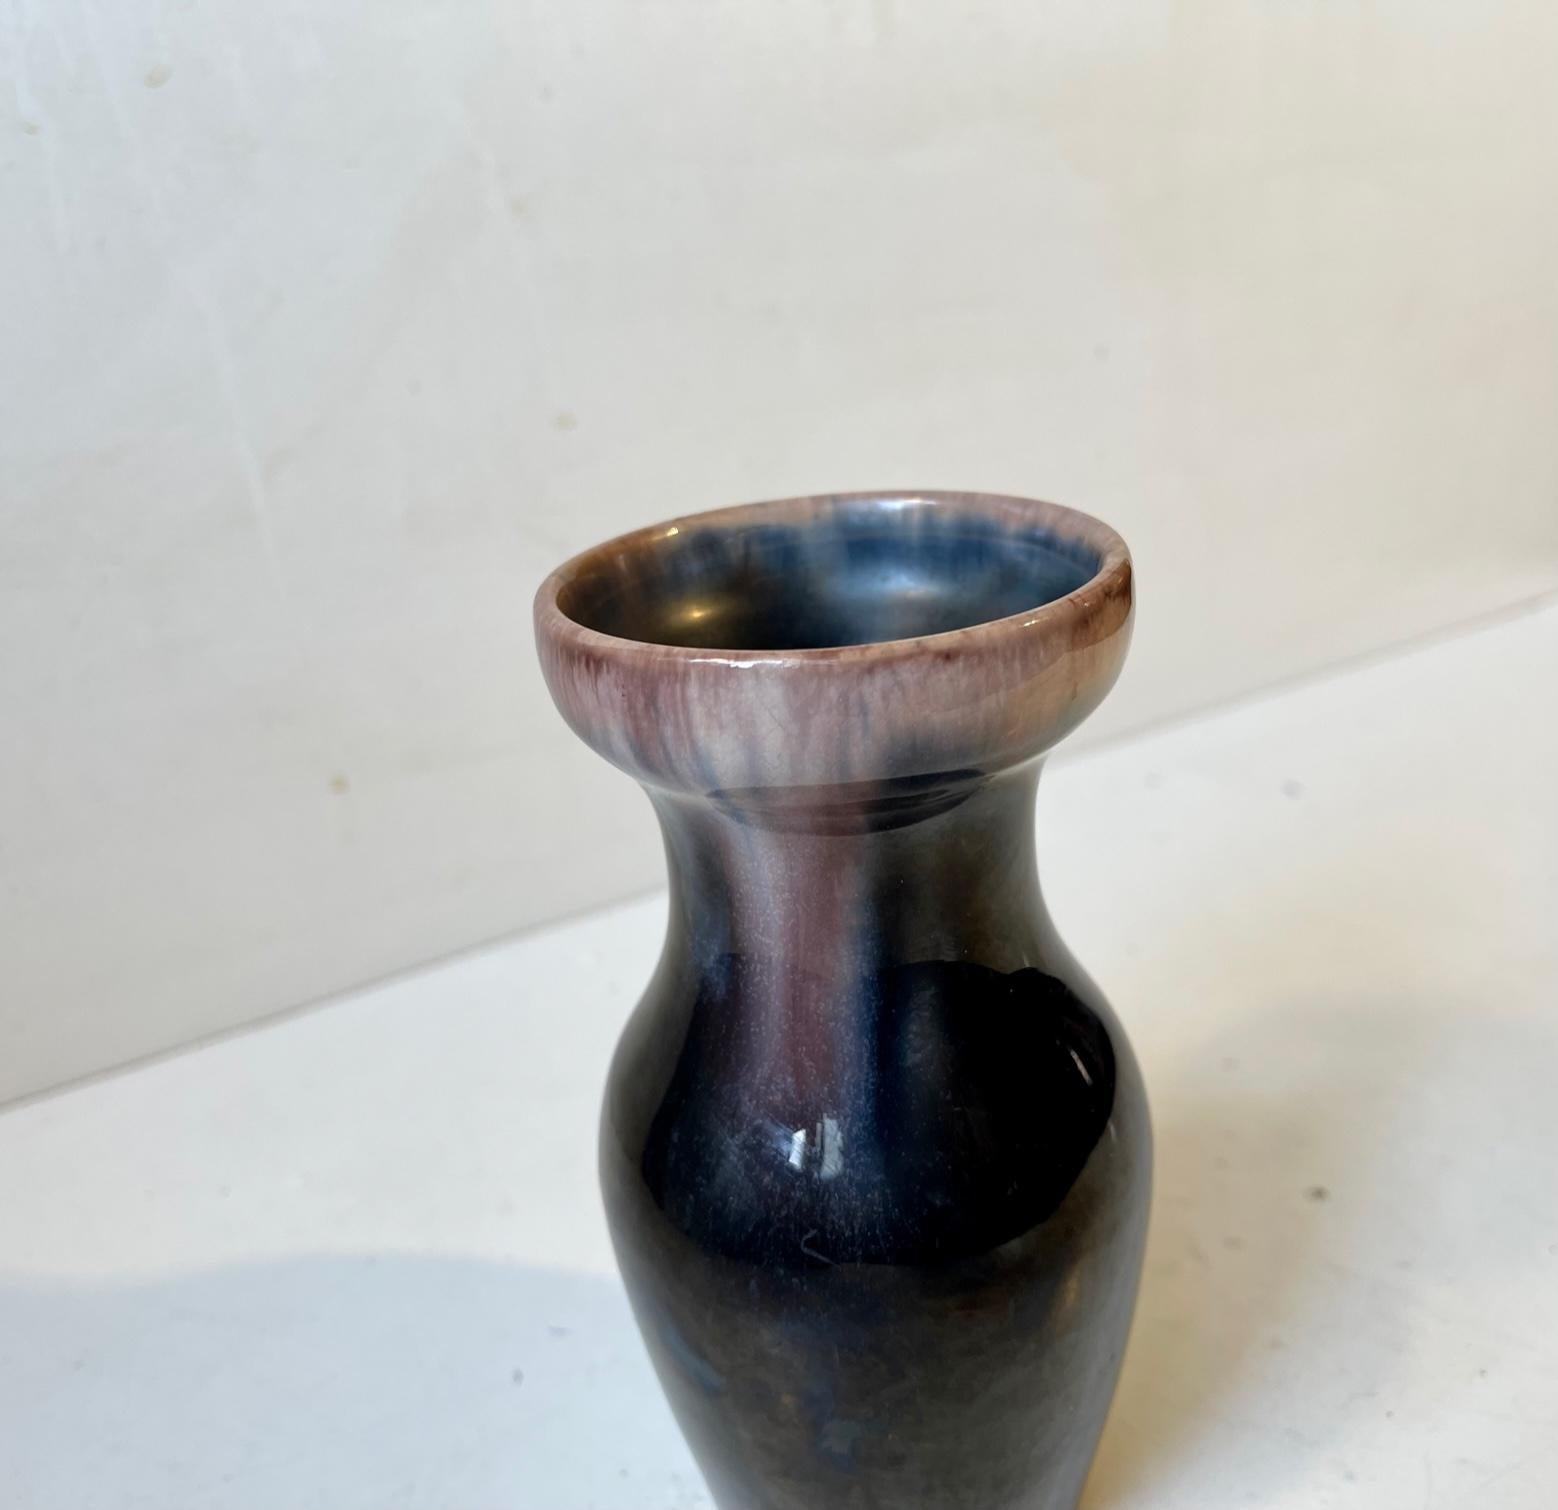 Early Danish Pottery vase with subtle Art Nouveau/Jugend styling and shape. Unusual plum and bone-toned glazes fading from the top down its sides. Designed and made by Michael Andersen & Son in Denmark between 1910-20. Originally intended as a